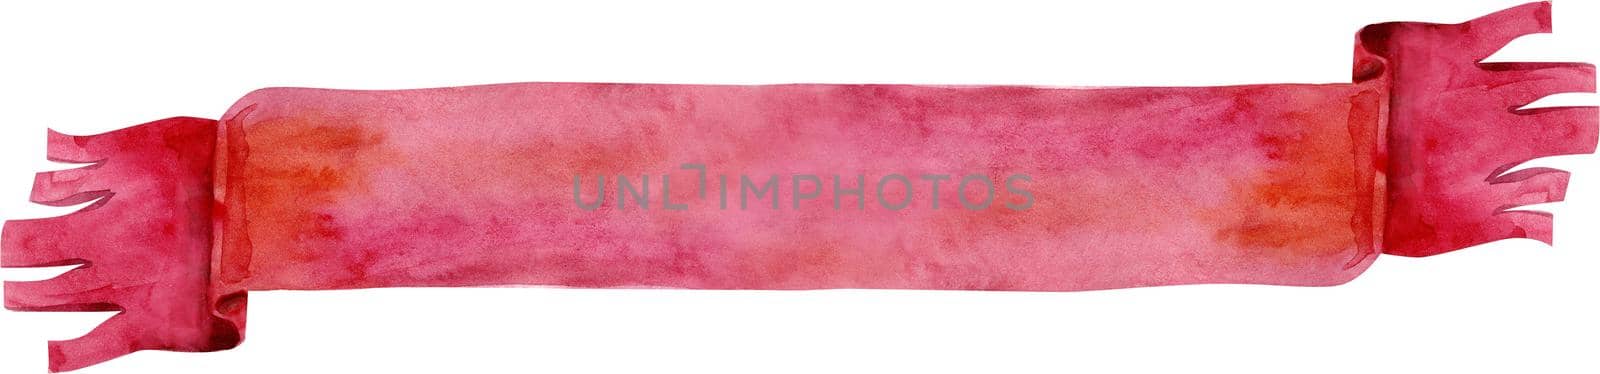 Watercolor red ribbon. Hand painted banners isolated on white background. by NataOmsk